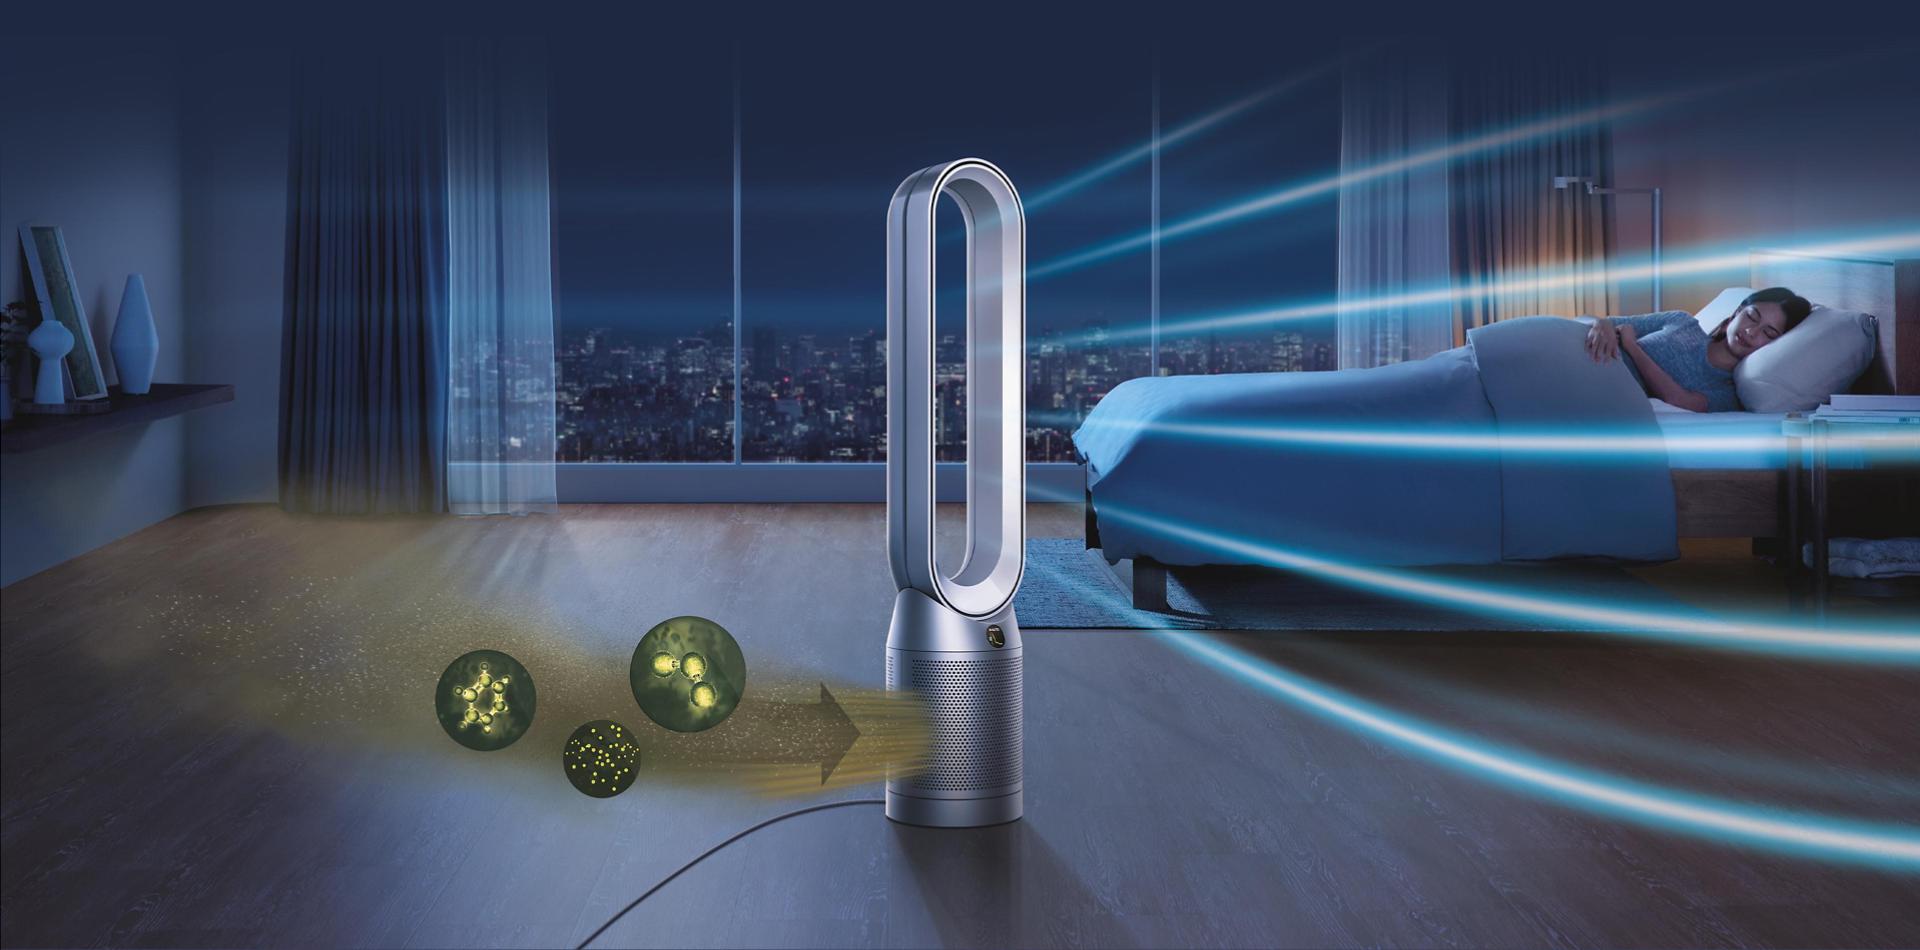 A Dyson air purifier in a bedroom at night time